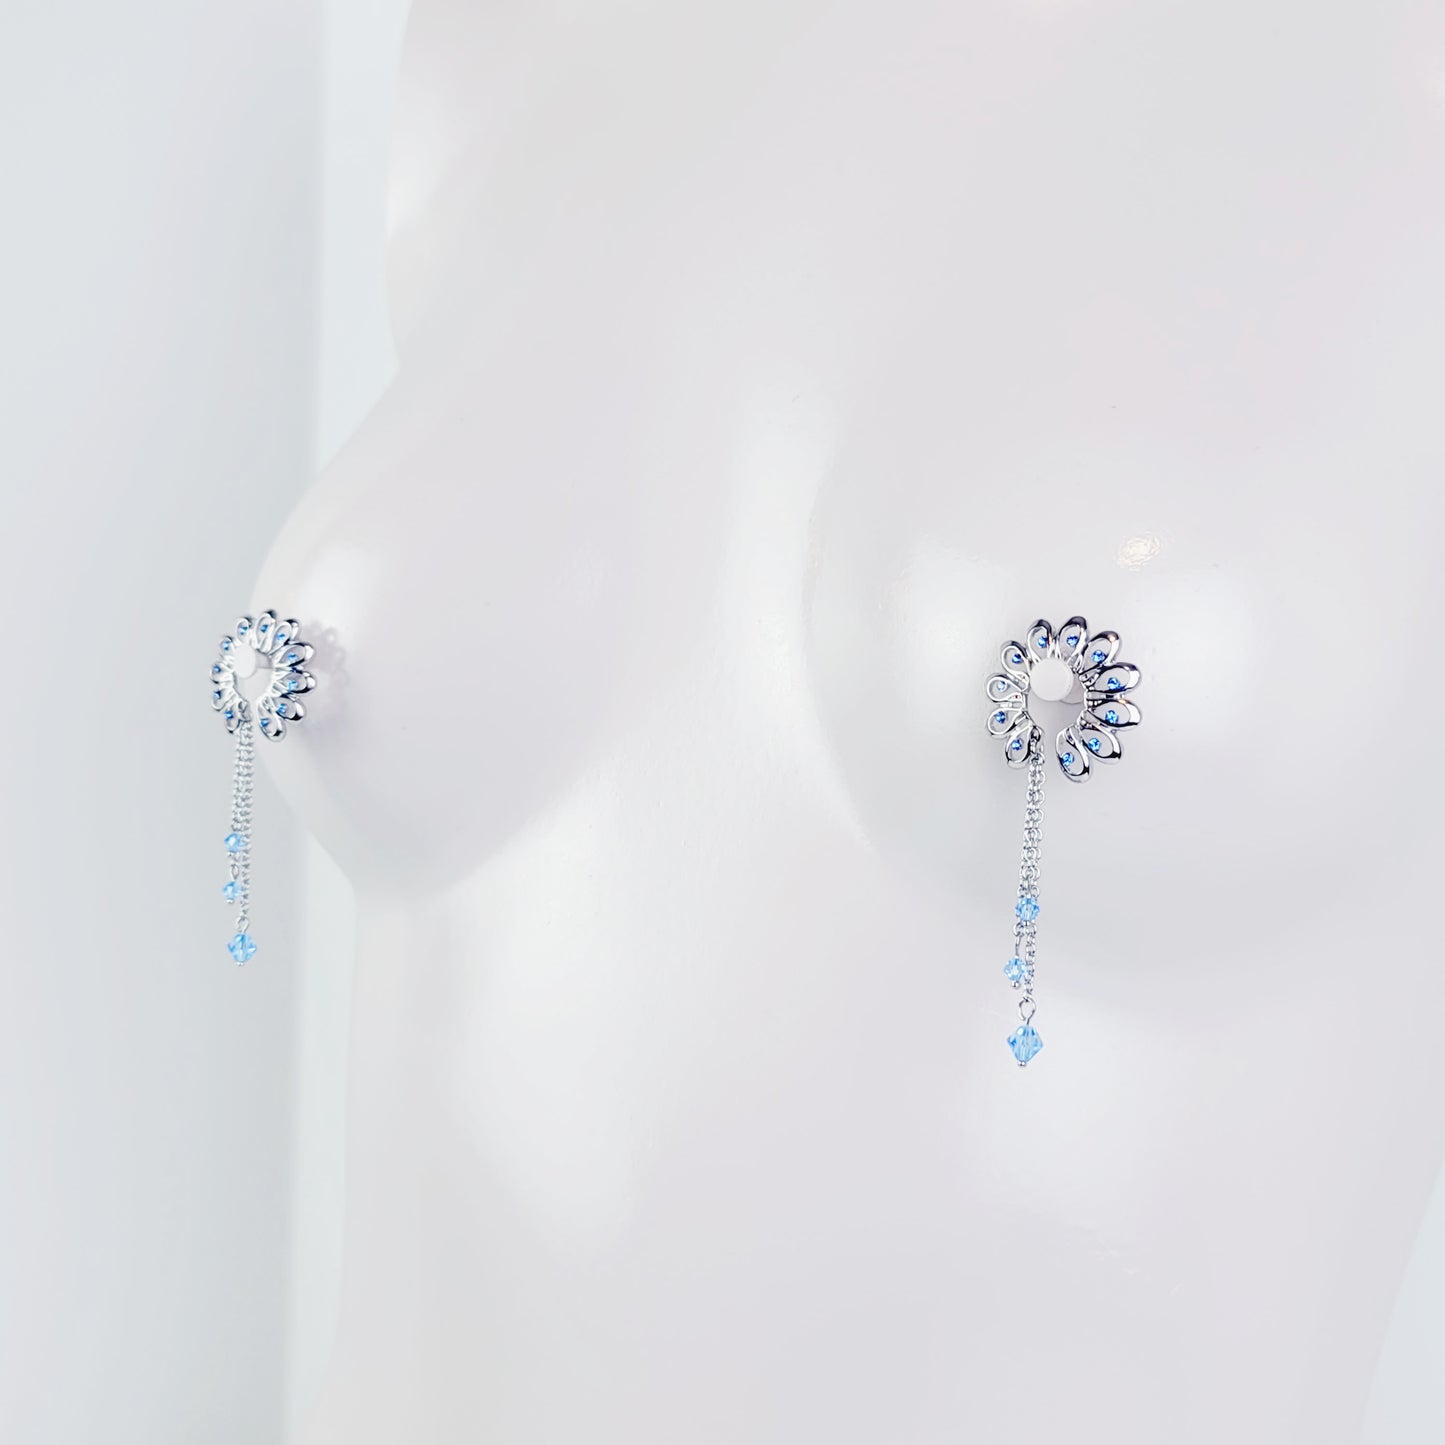 Nipple Shields with Blue Crystals and chain Dangles, Non Piercing Nipple Rings. MATURE, BDSM, Erotic Body Jewelry for Women